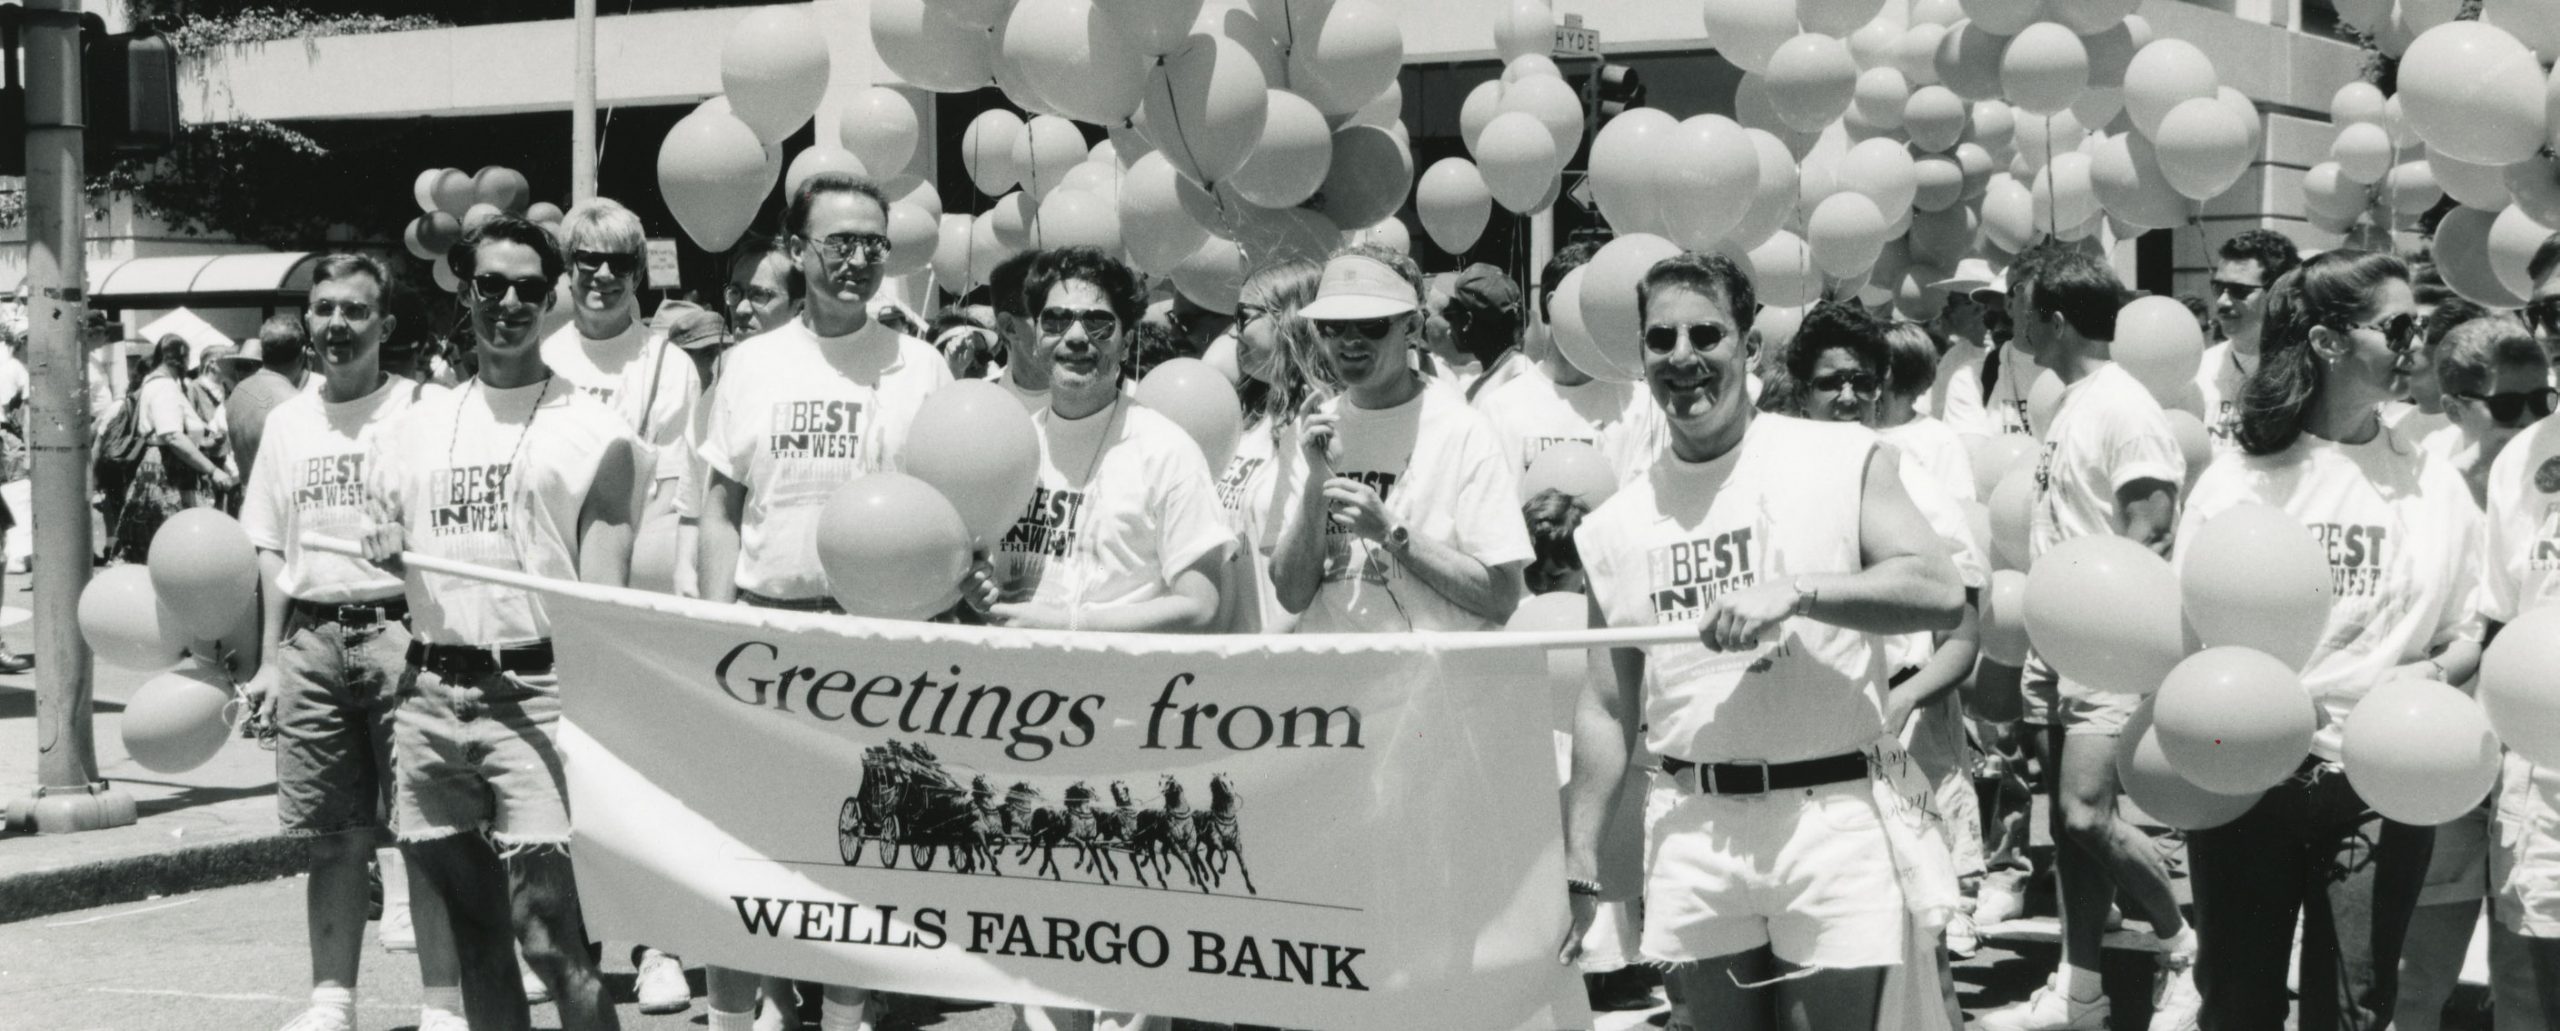 A group of people carrying a Wells Fargo banner with stagecoach image while marching in a Pride parade. In the background is a large building and balloons.